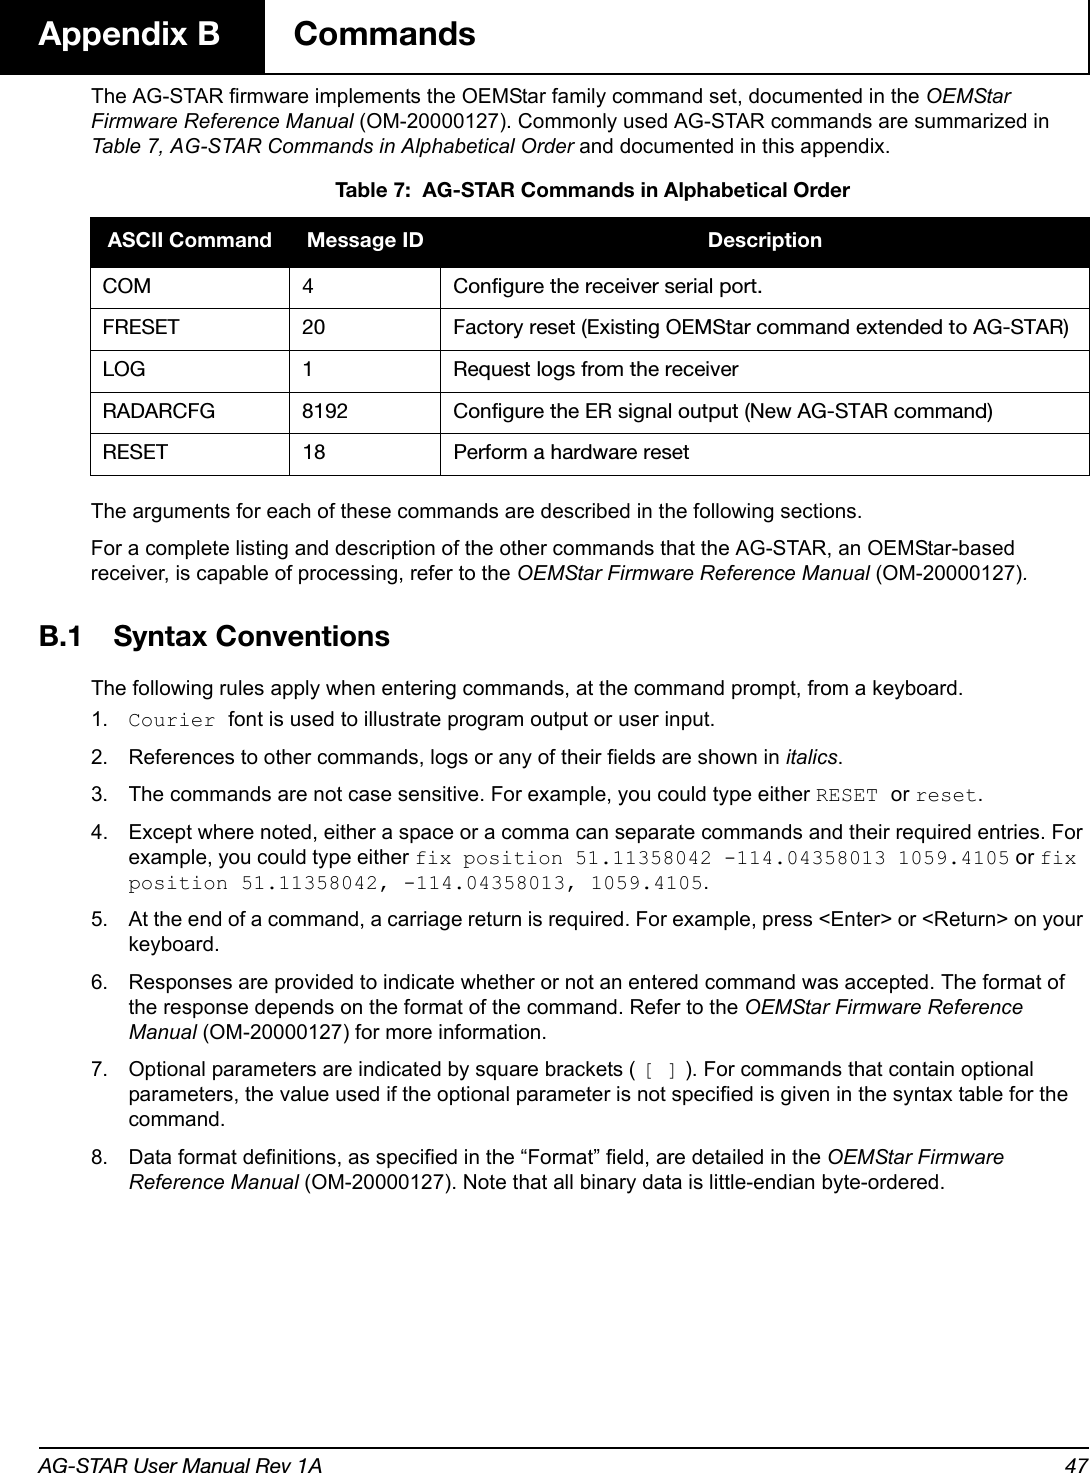 AG-STAR User Manual Rev 1A 47Appendix B  CommandsThe AG-STAR firmware implements the OEMStar family command set, documented in the OEMStar Firmware Reference Manual (OM-20000127). Commonly used AG-STAR commands are summarized in Table 7, AG-STAR Commands in Alphabetical Order and documented in this appendix. Table 7:  AG-STAR Commands in Alphabetical OrderThe arguments for each of these commands are described in the following sections.For a complete listing and description of the other commands that the AG-STAR, an OEMStar-based receiver, is capable of processing, refer to the OEMStar Firmware Reference Manual (OM-20000127).B.1 Syntax ConventionsThe following rules apply when entering commands, at the command prompt, from a keyboard.1. Courier font is used to illustrate program output or user input.2. References to other commands, logs or any of their fields are shown in italics.3. The commands are not case sensitive. For example, you could type either RESET or reset.4. Except where noted, either a space or a comma can separate commands and their required entries. For example, you could type either fix position 51.11358042 -114.04358013 1059.4105 or fix position 51.11358042, -114.04358013, 1059.4105.5. At the end of a command, a carriage return is required. For example, press &lt;Enter&gt; or &lt;Return&gt; on your keyboard.6. Responses are provided to indicate whether or not an entered command was accepted. The format of the response depends on the format of the command. Refer to the OEMStar Firmware Reference Manual (OM-20000127) for more information.7. Optional parameters are indicated by square brackets ( [ ] ). For commands that contain optional parameters, the value used if the optional parameter is not specified is given in the syntax table for the command.8. Data format definitions, as specified in the “Format” field, are detailed in the OEMStar Firmware Reference Manual (OM-20000127). Note that all binary data is little-endian byte-ordered.ASCII Command Message ID DescriptionCOM 4 Configure the receiver serial port.FRESET 20 Factory reset (Existing OEMStar command extended to AG-STAR)LOG 1 Request logs from the receiver RADARCFG 8192 Configure the ER signal output (New AG-STAR command)RESET 18 Perform a hardware reset 